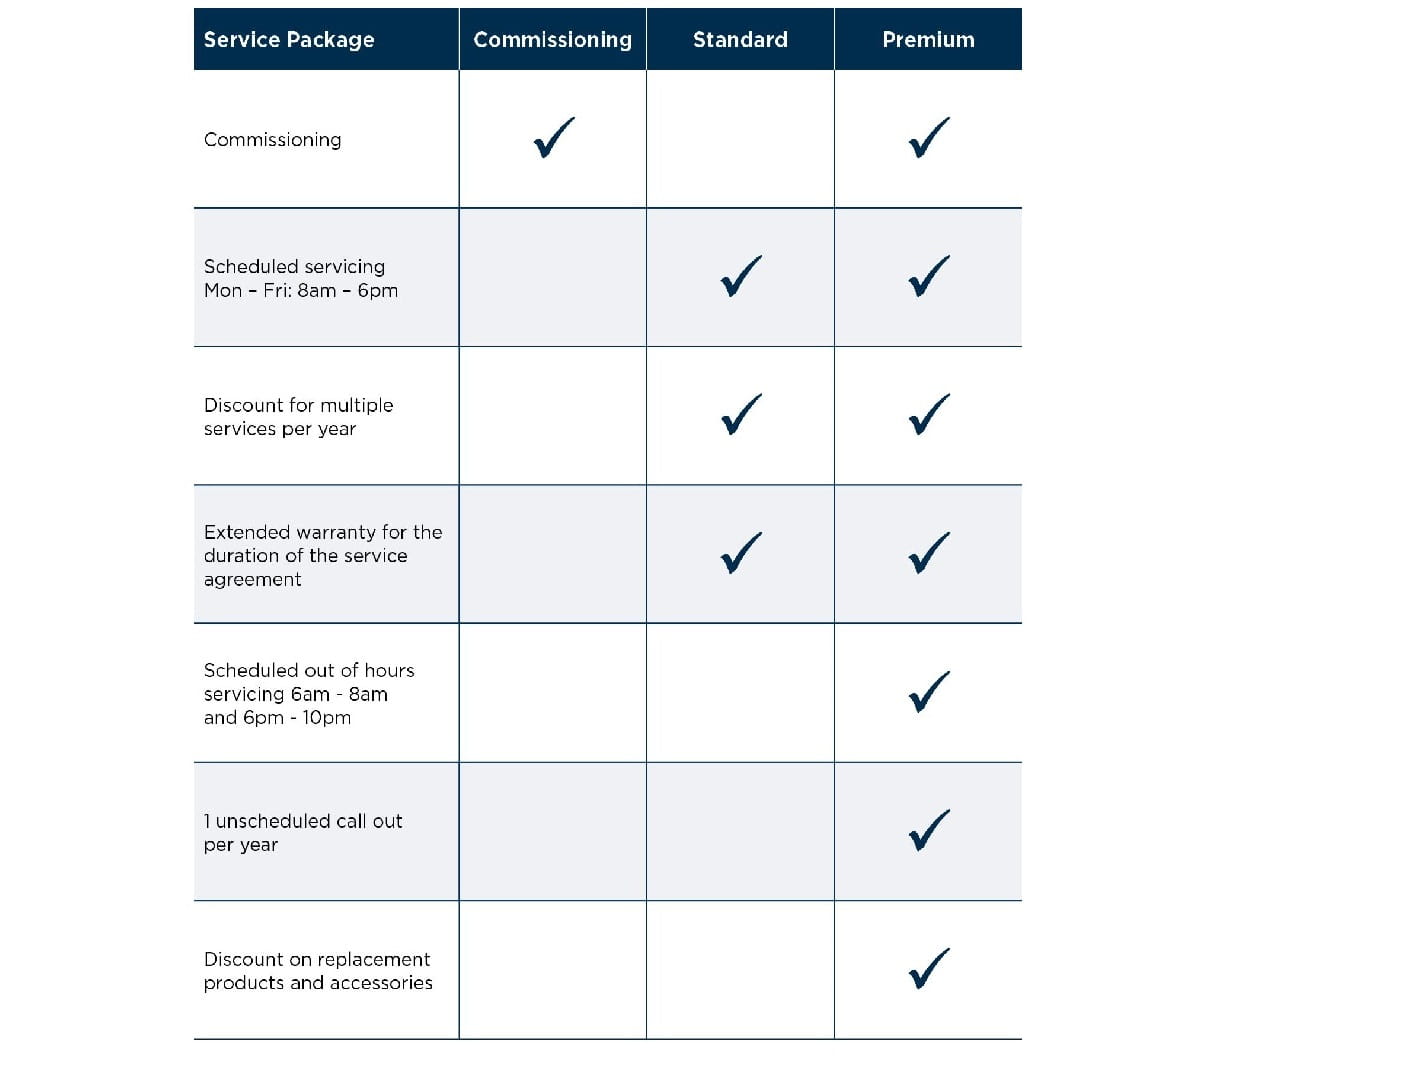 A table showing what is and isn't included in the commissioning and service packages